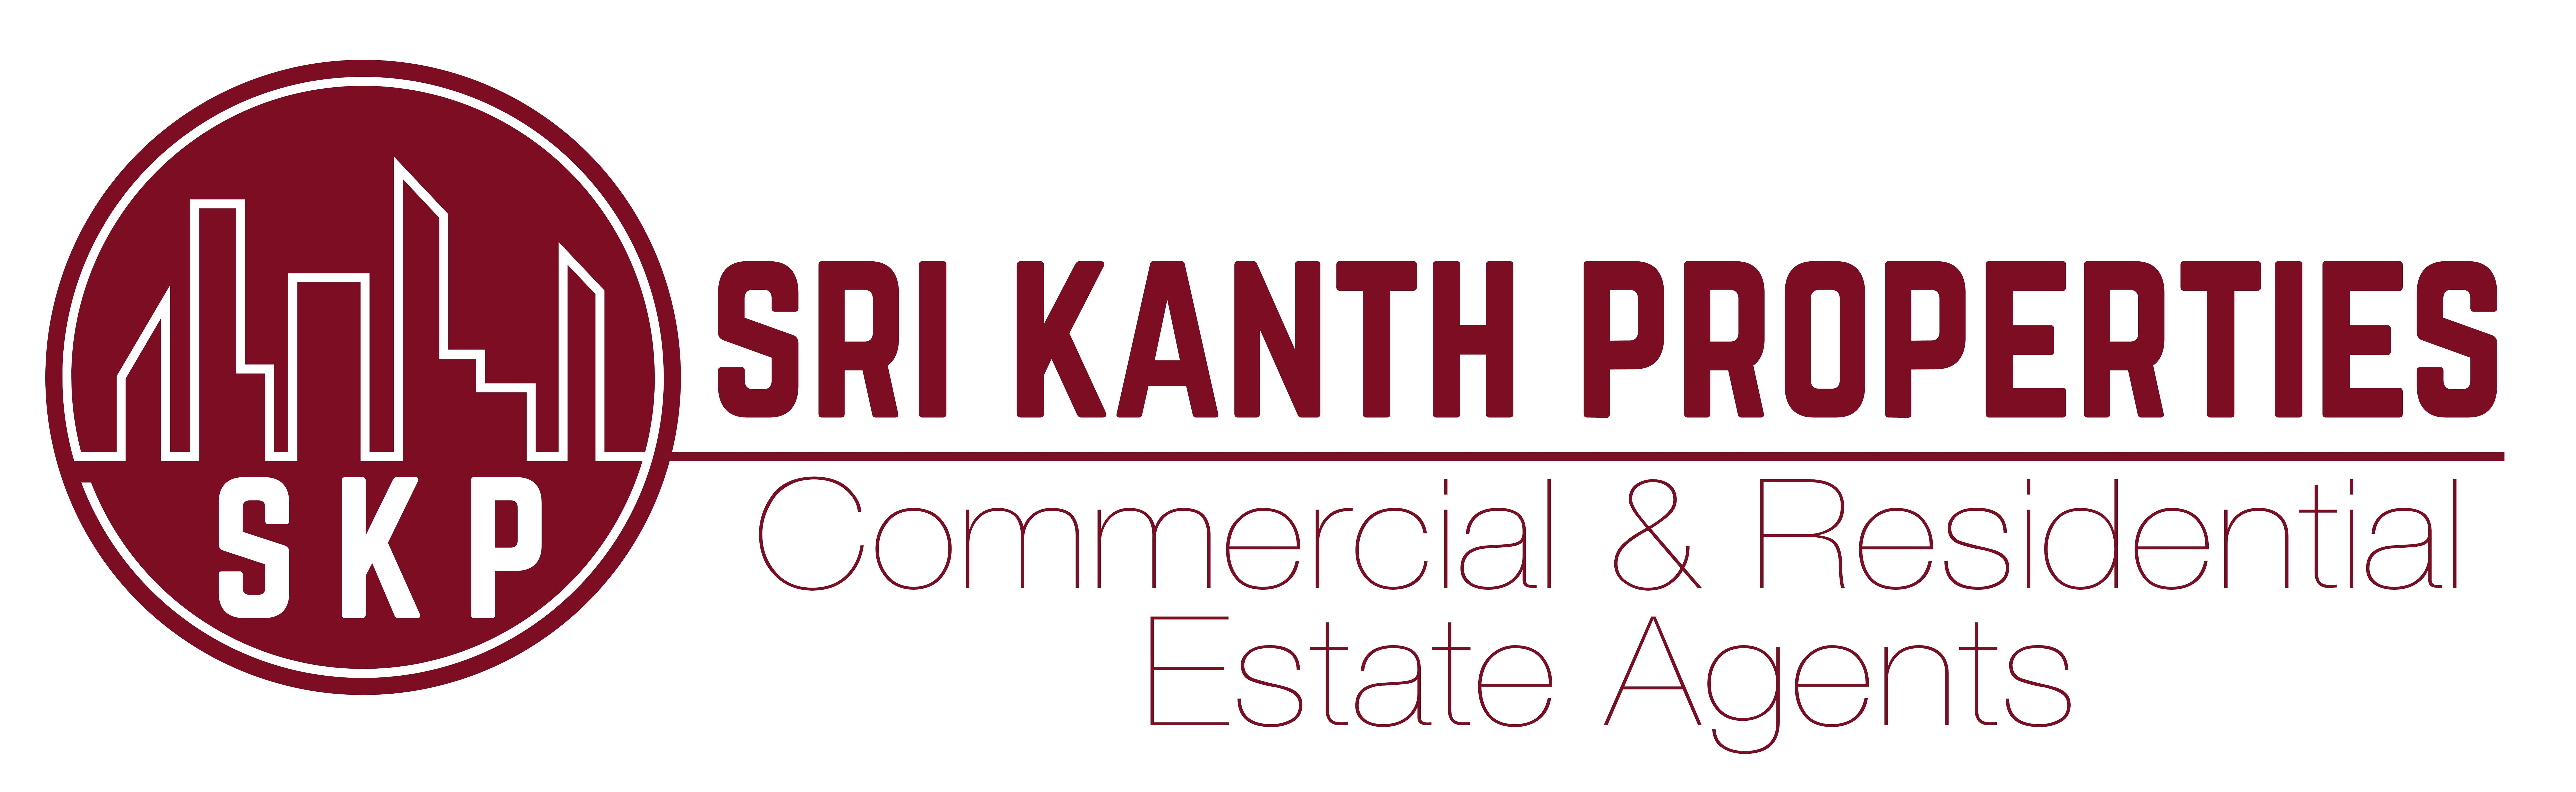 Sri Kanth Properties - London : Letting agents in Chiswick Greater London Hounslow